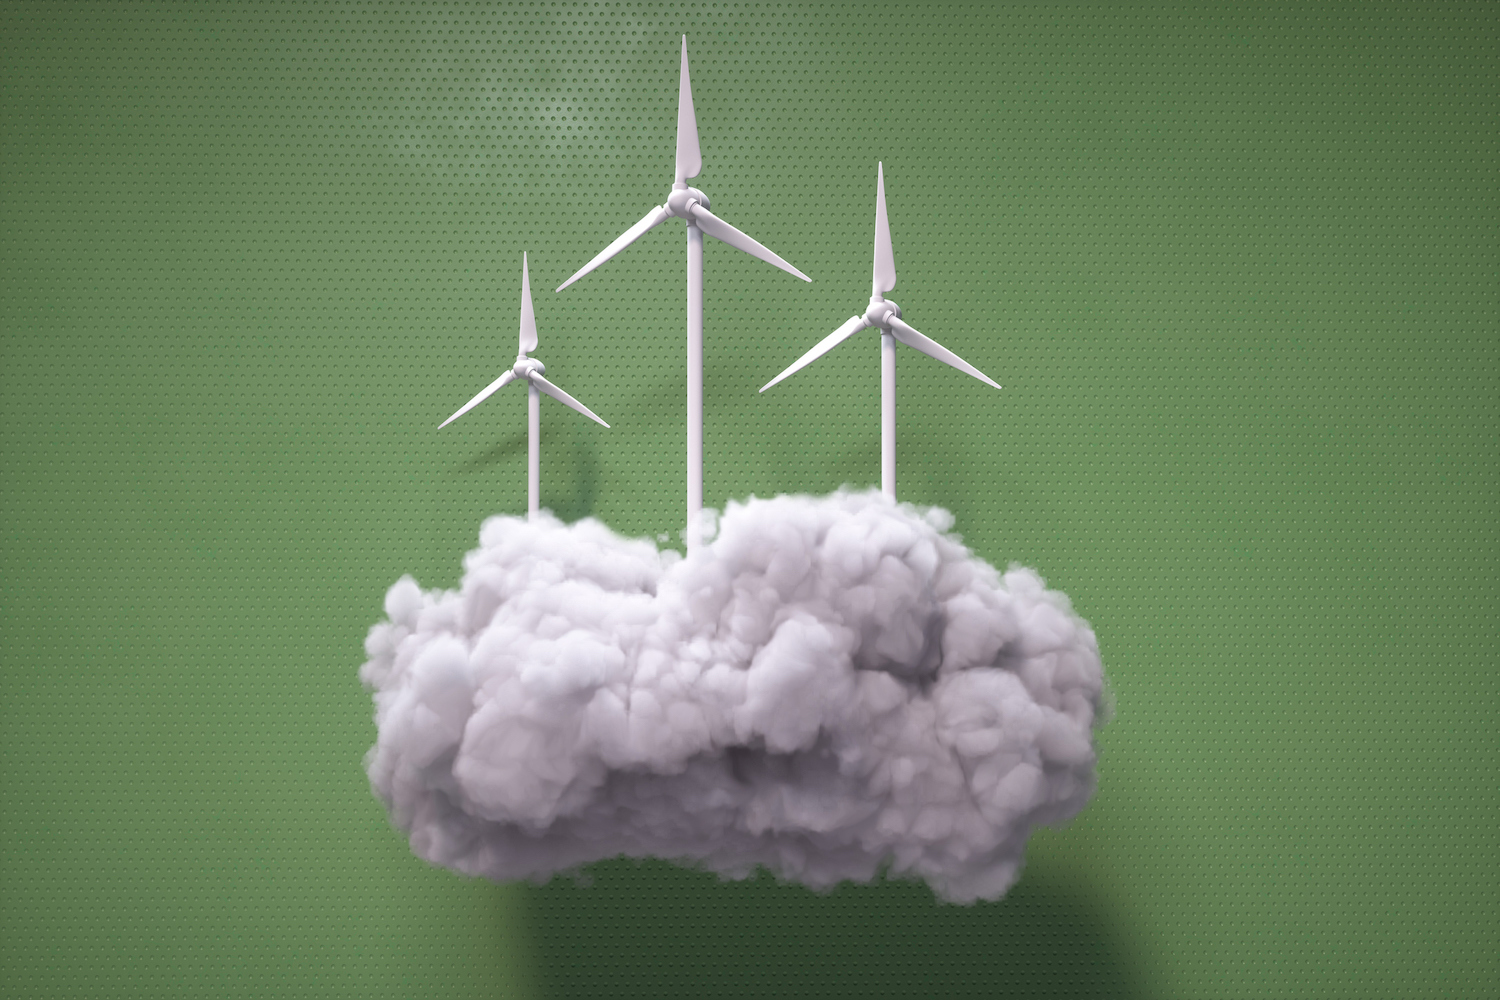 Digital generated image of multiple wind turbines on puffy cloud against green background.